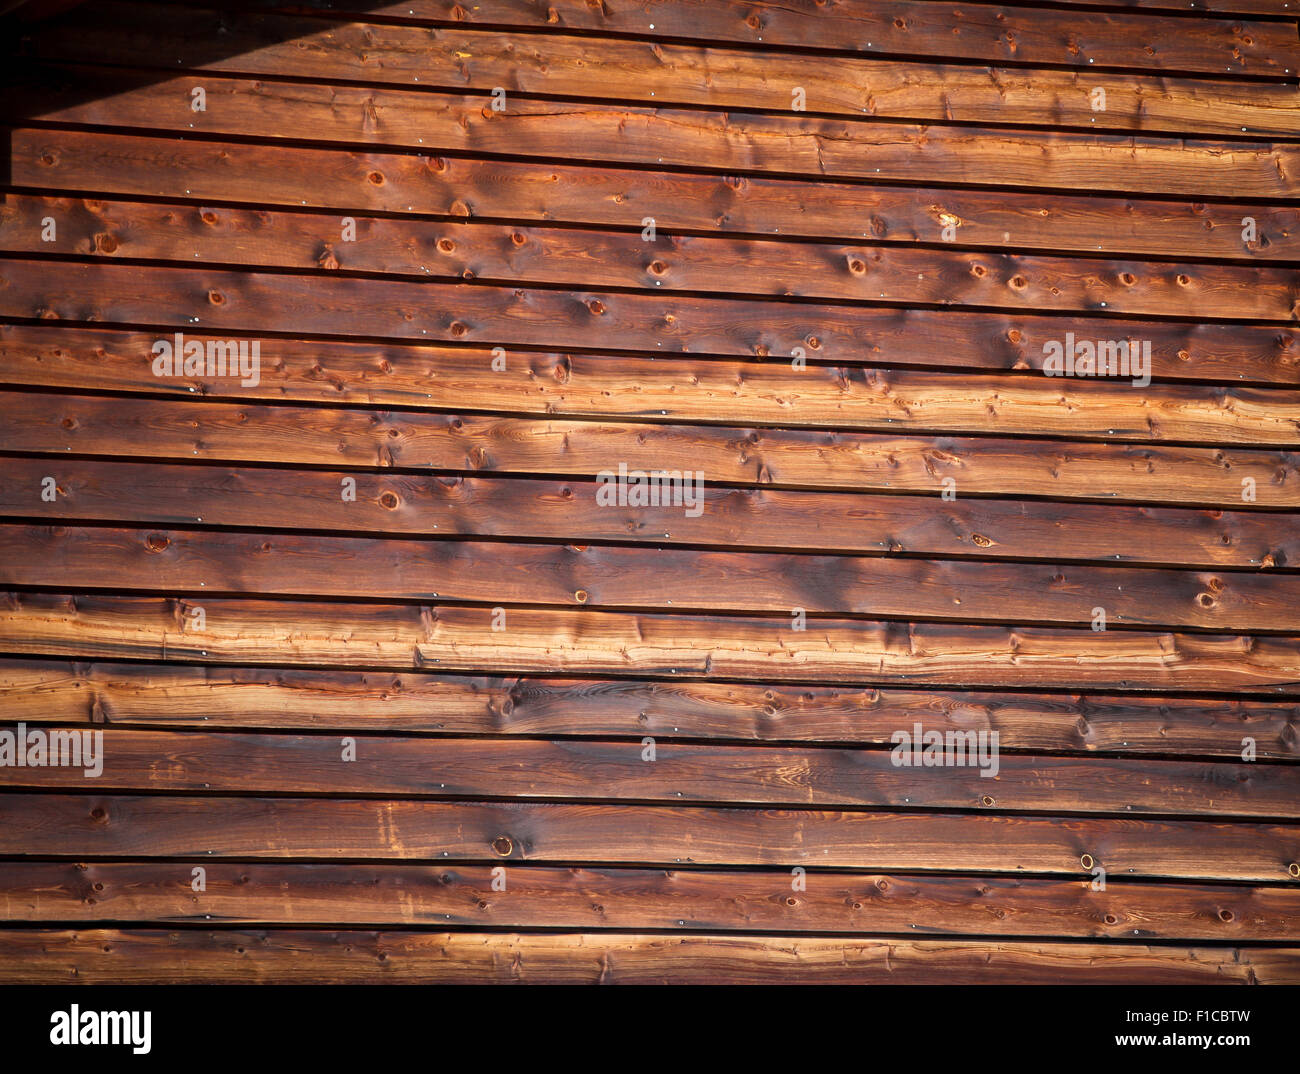 Brown Wood Plank Textured Background Stock Photo